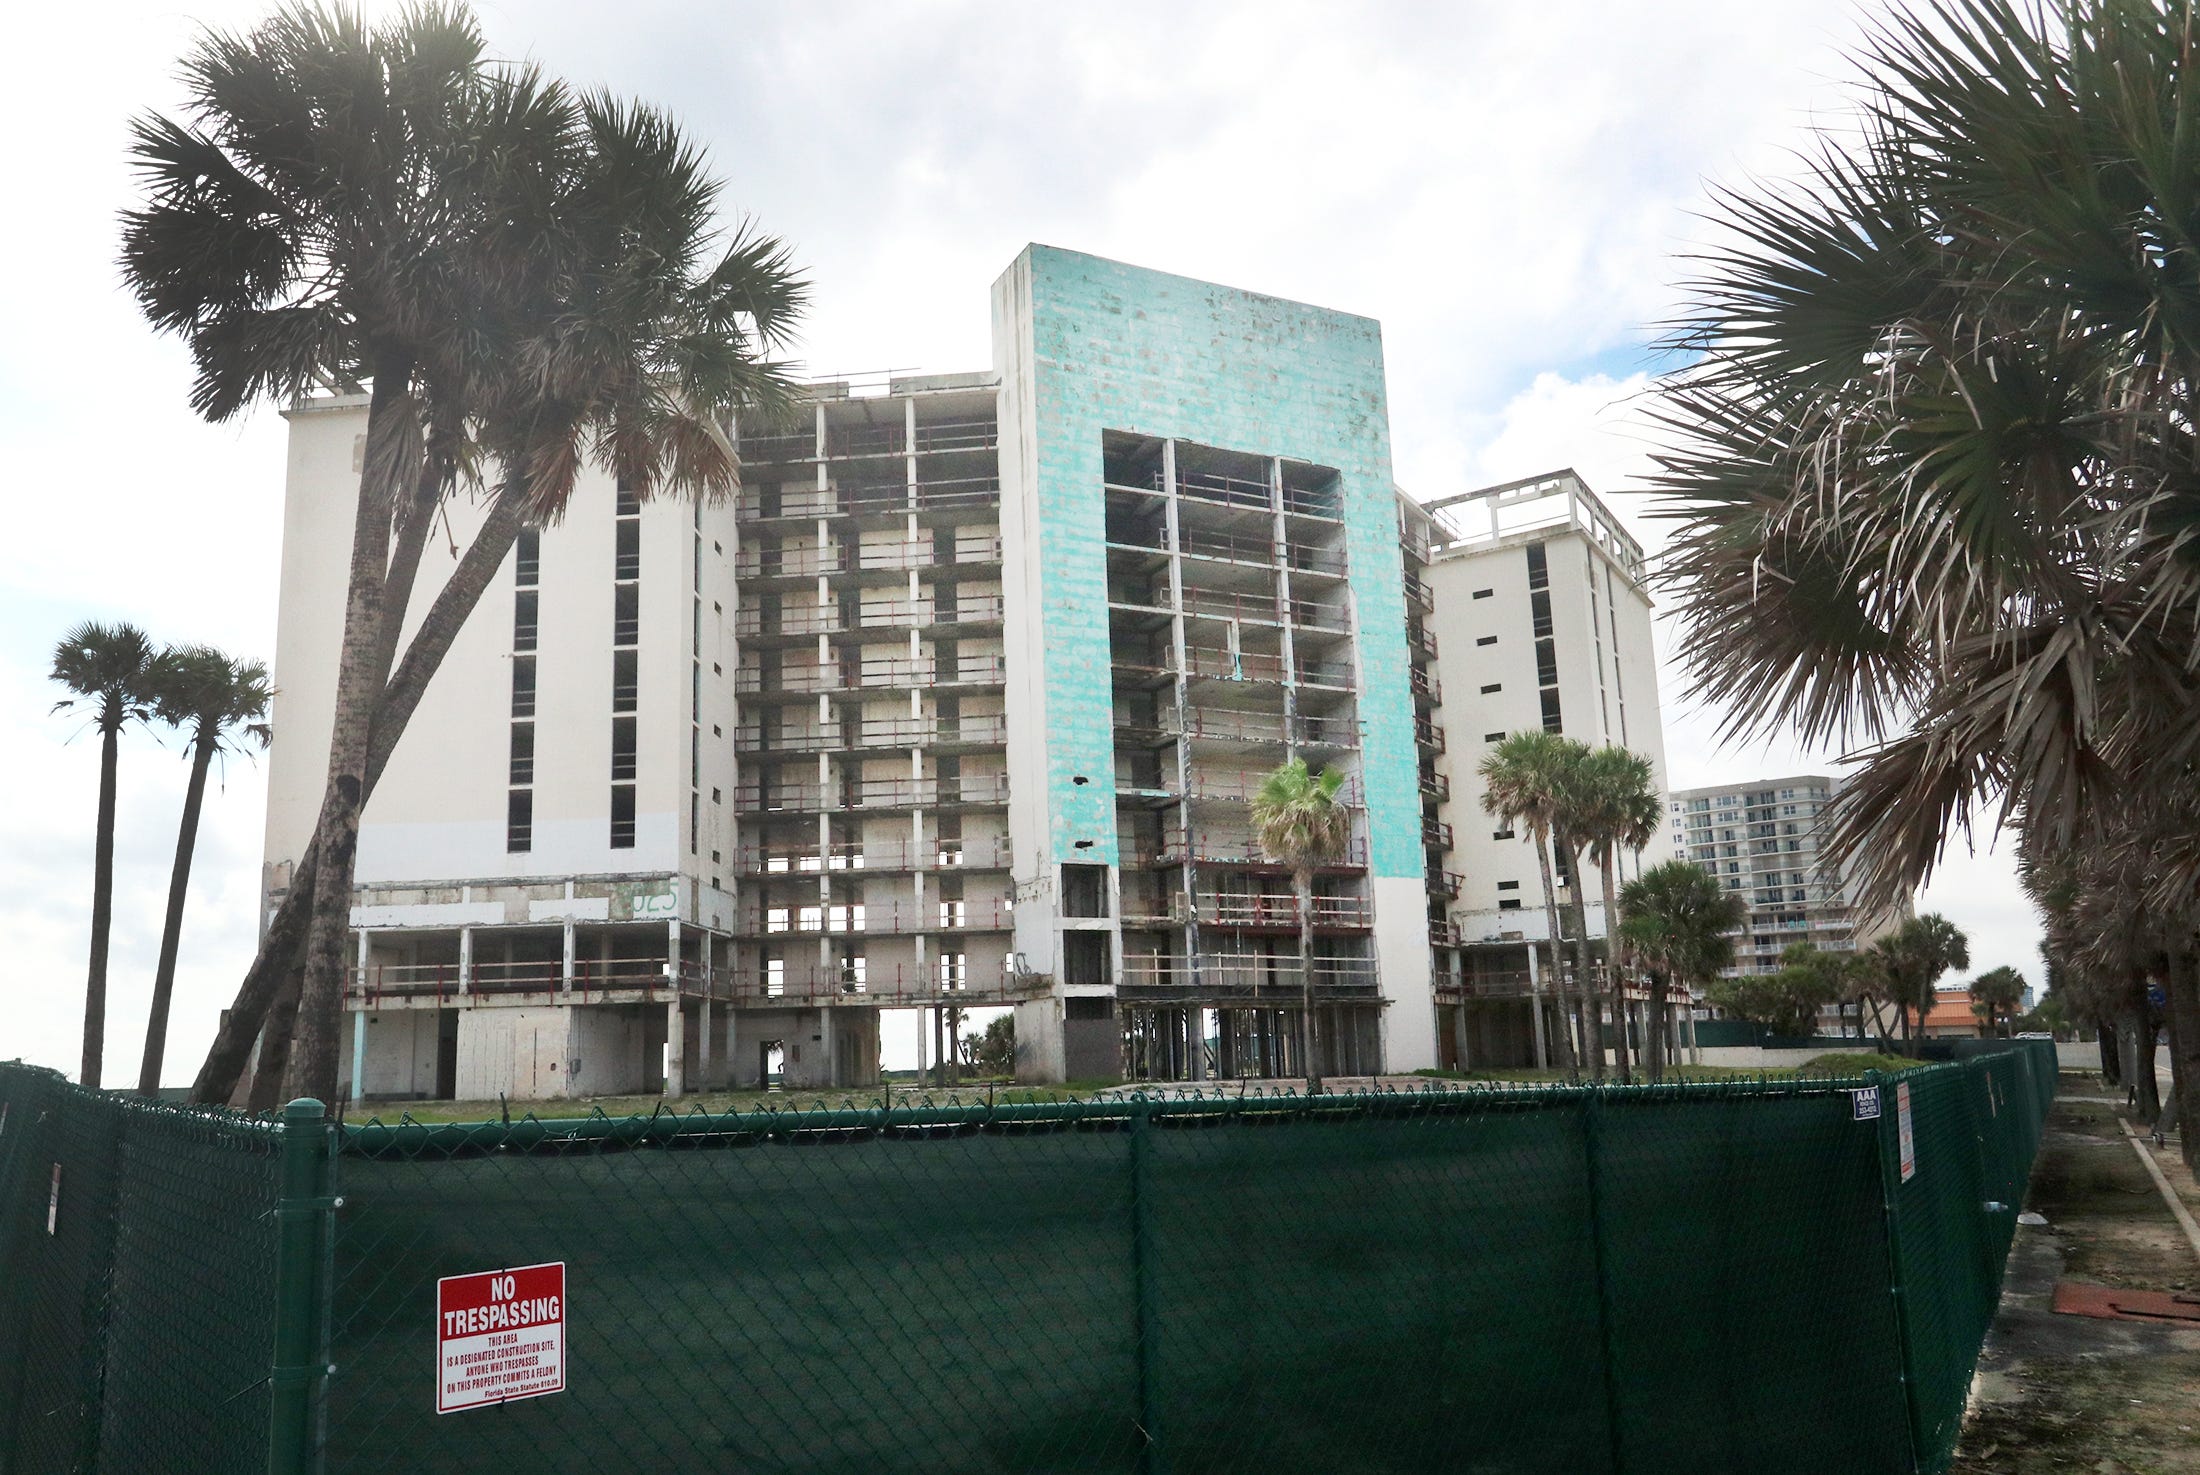 Treasure Island site could see the development of a new 300-room hotel